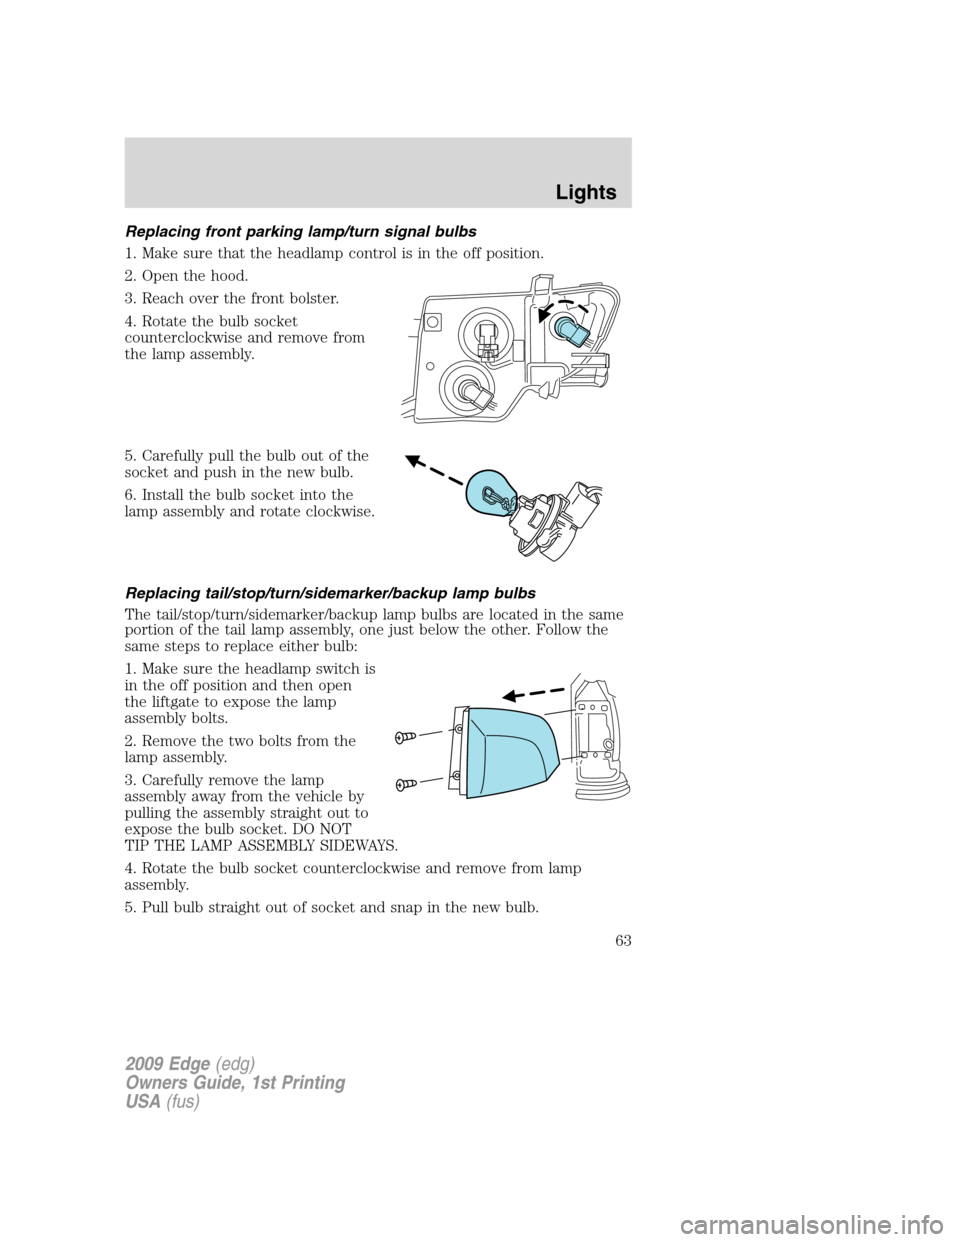 FORD EDGE 2009 1.G Owners Manual Replacing front parking lamp/turn signal bulbs
1. Make sure that the headlamp control is in the off position.
2. Open the hood.
3. Reach over the front bolster.
4. Rotate the bulb socket
counterclockw